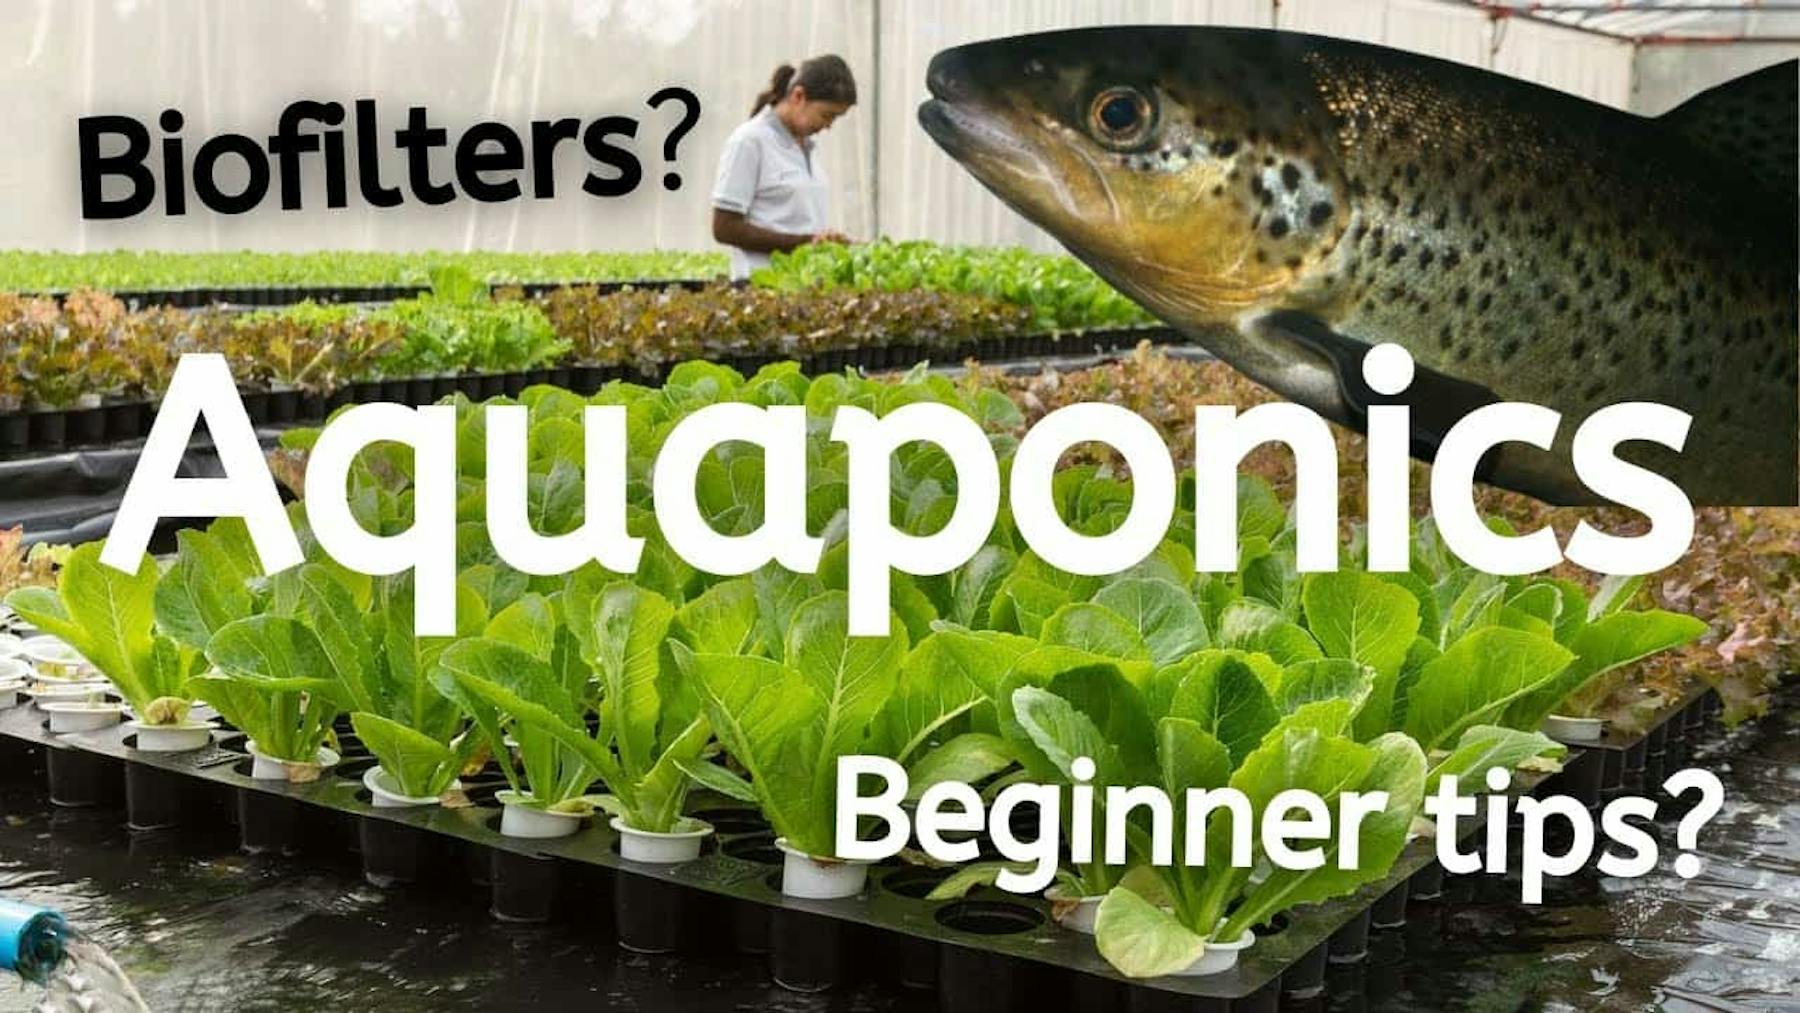 biofilters? aquaponics, giant fish, plants, and beginner tips?